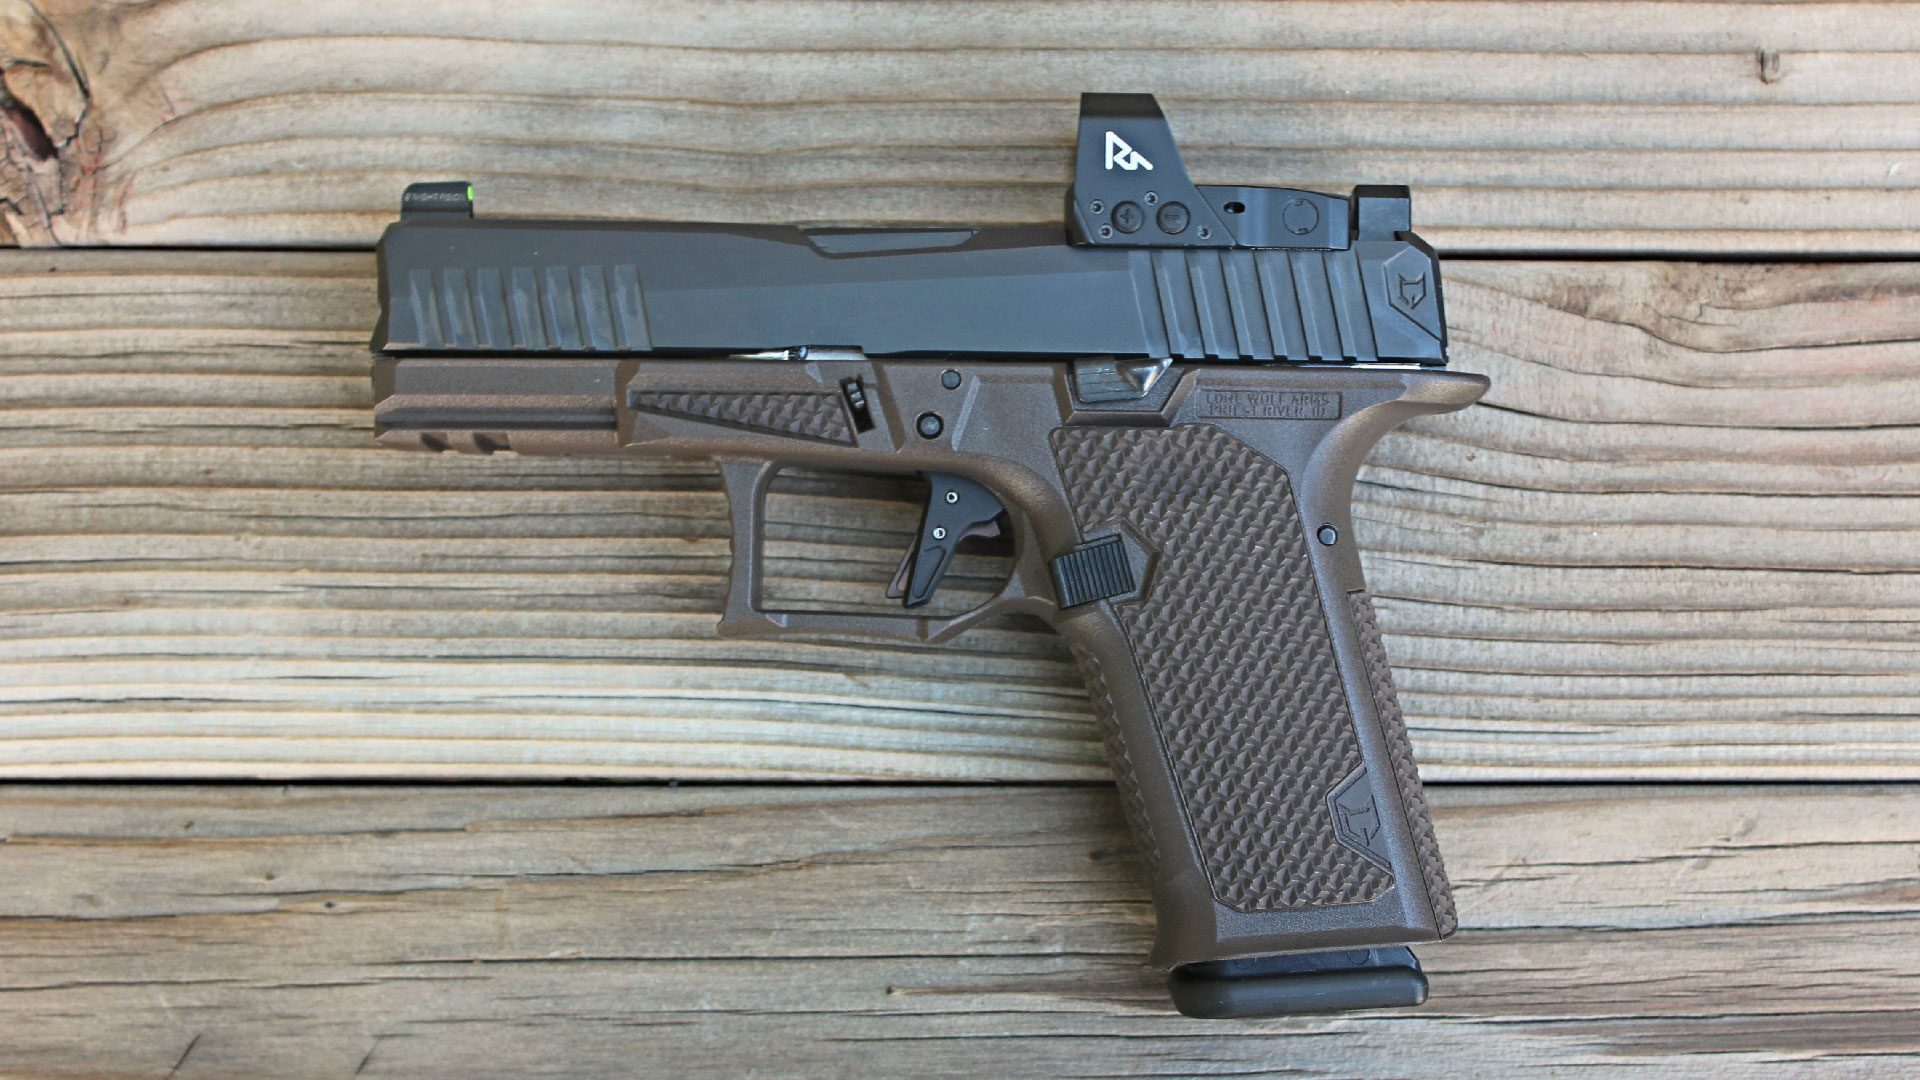 Range Report: Glock 17 Vickers Tactical - The Shooter's Log